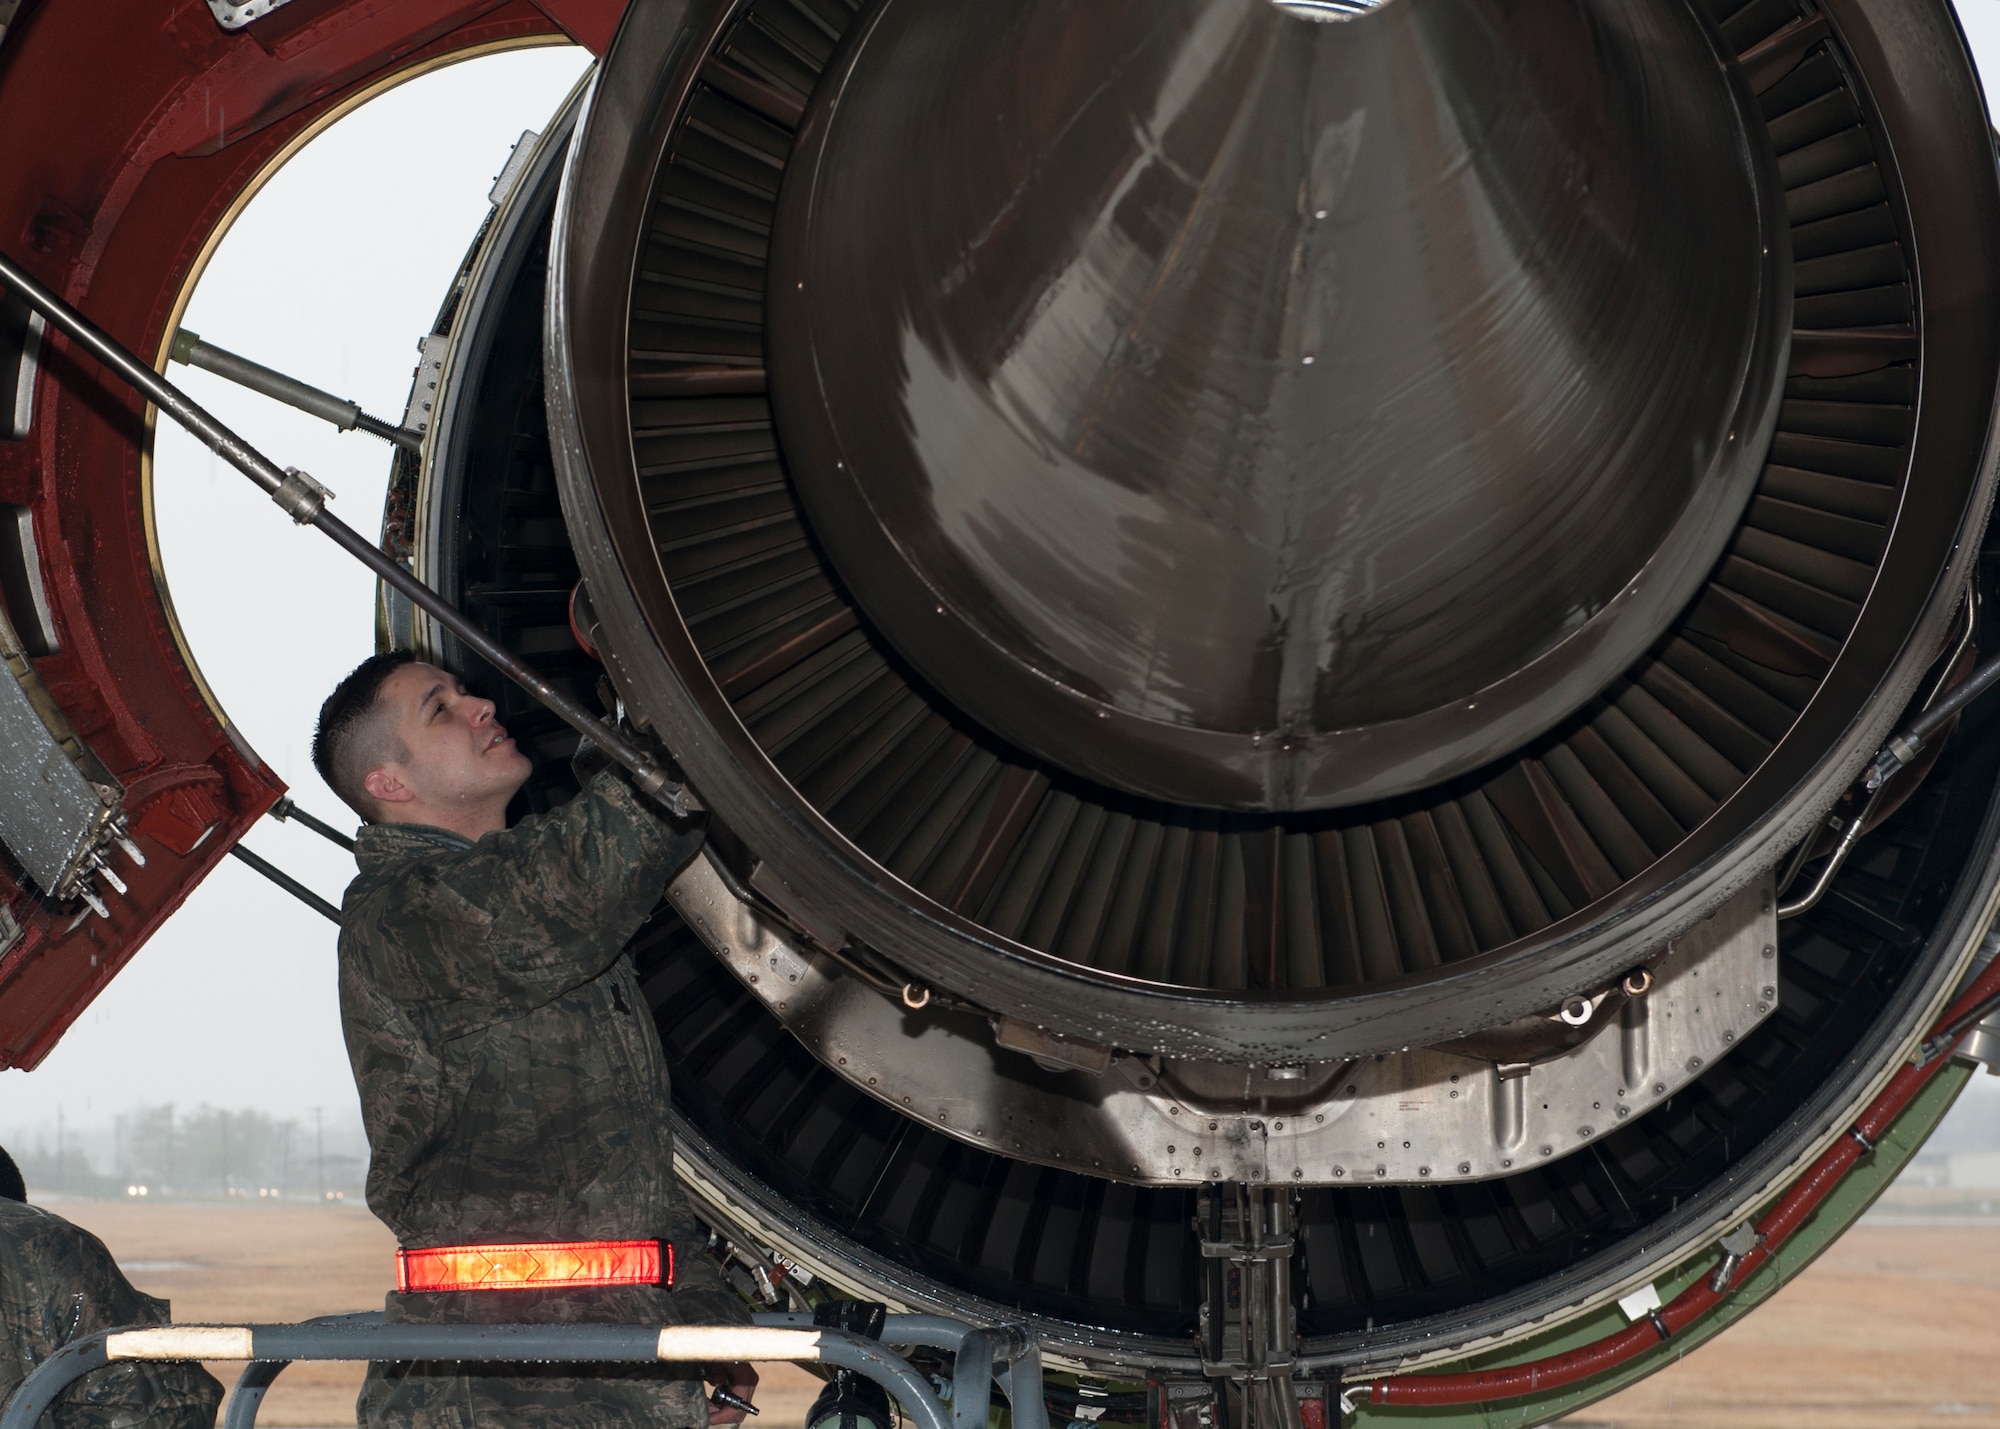 Senior Airman Tyler Garcia, 436th Aircraft Maintenance Squadron electrical and environmental systems journeyman, performs maintenance on a C-5M Super Galaxy jet engine Feb. 24, 2016, on the flight line at Joint Base McGuire-Dix-Lakehurst, N.J. Team Dover maintainers are anticipated to operate at the joint base until August, with a rotation at the halfway point. (U.S. Air Force photo/Senior Airman Zachary Cacicia)